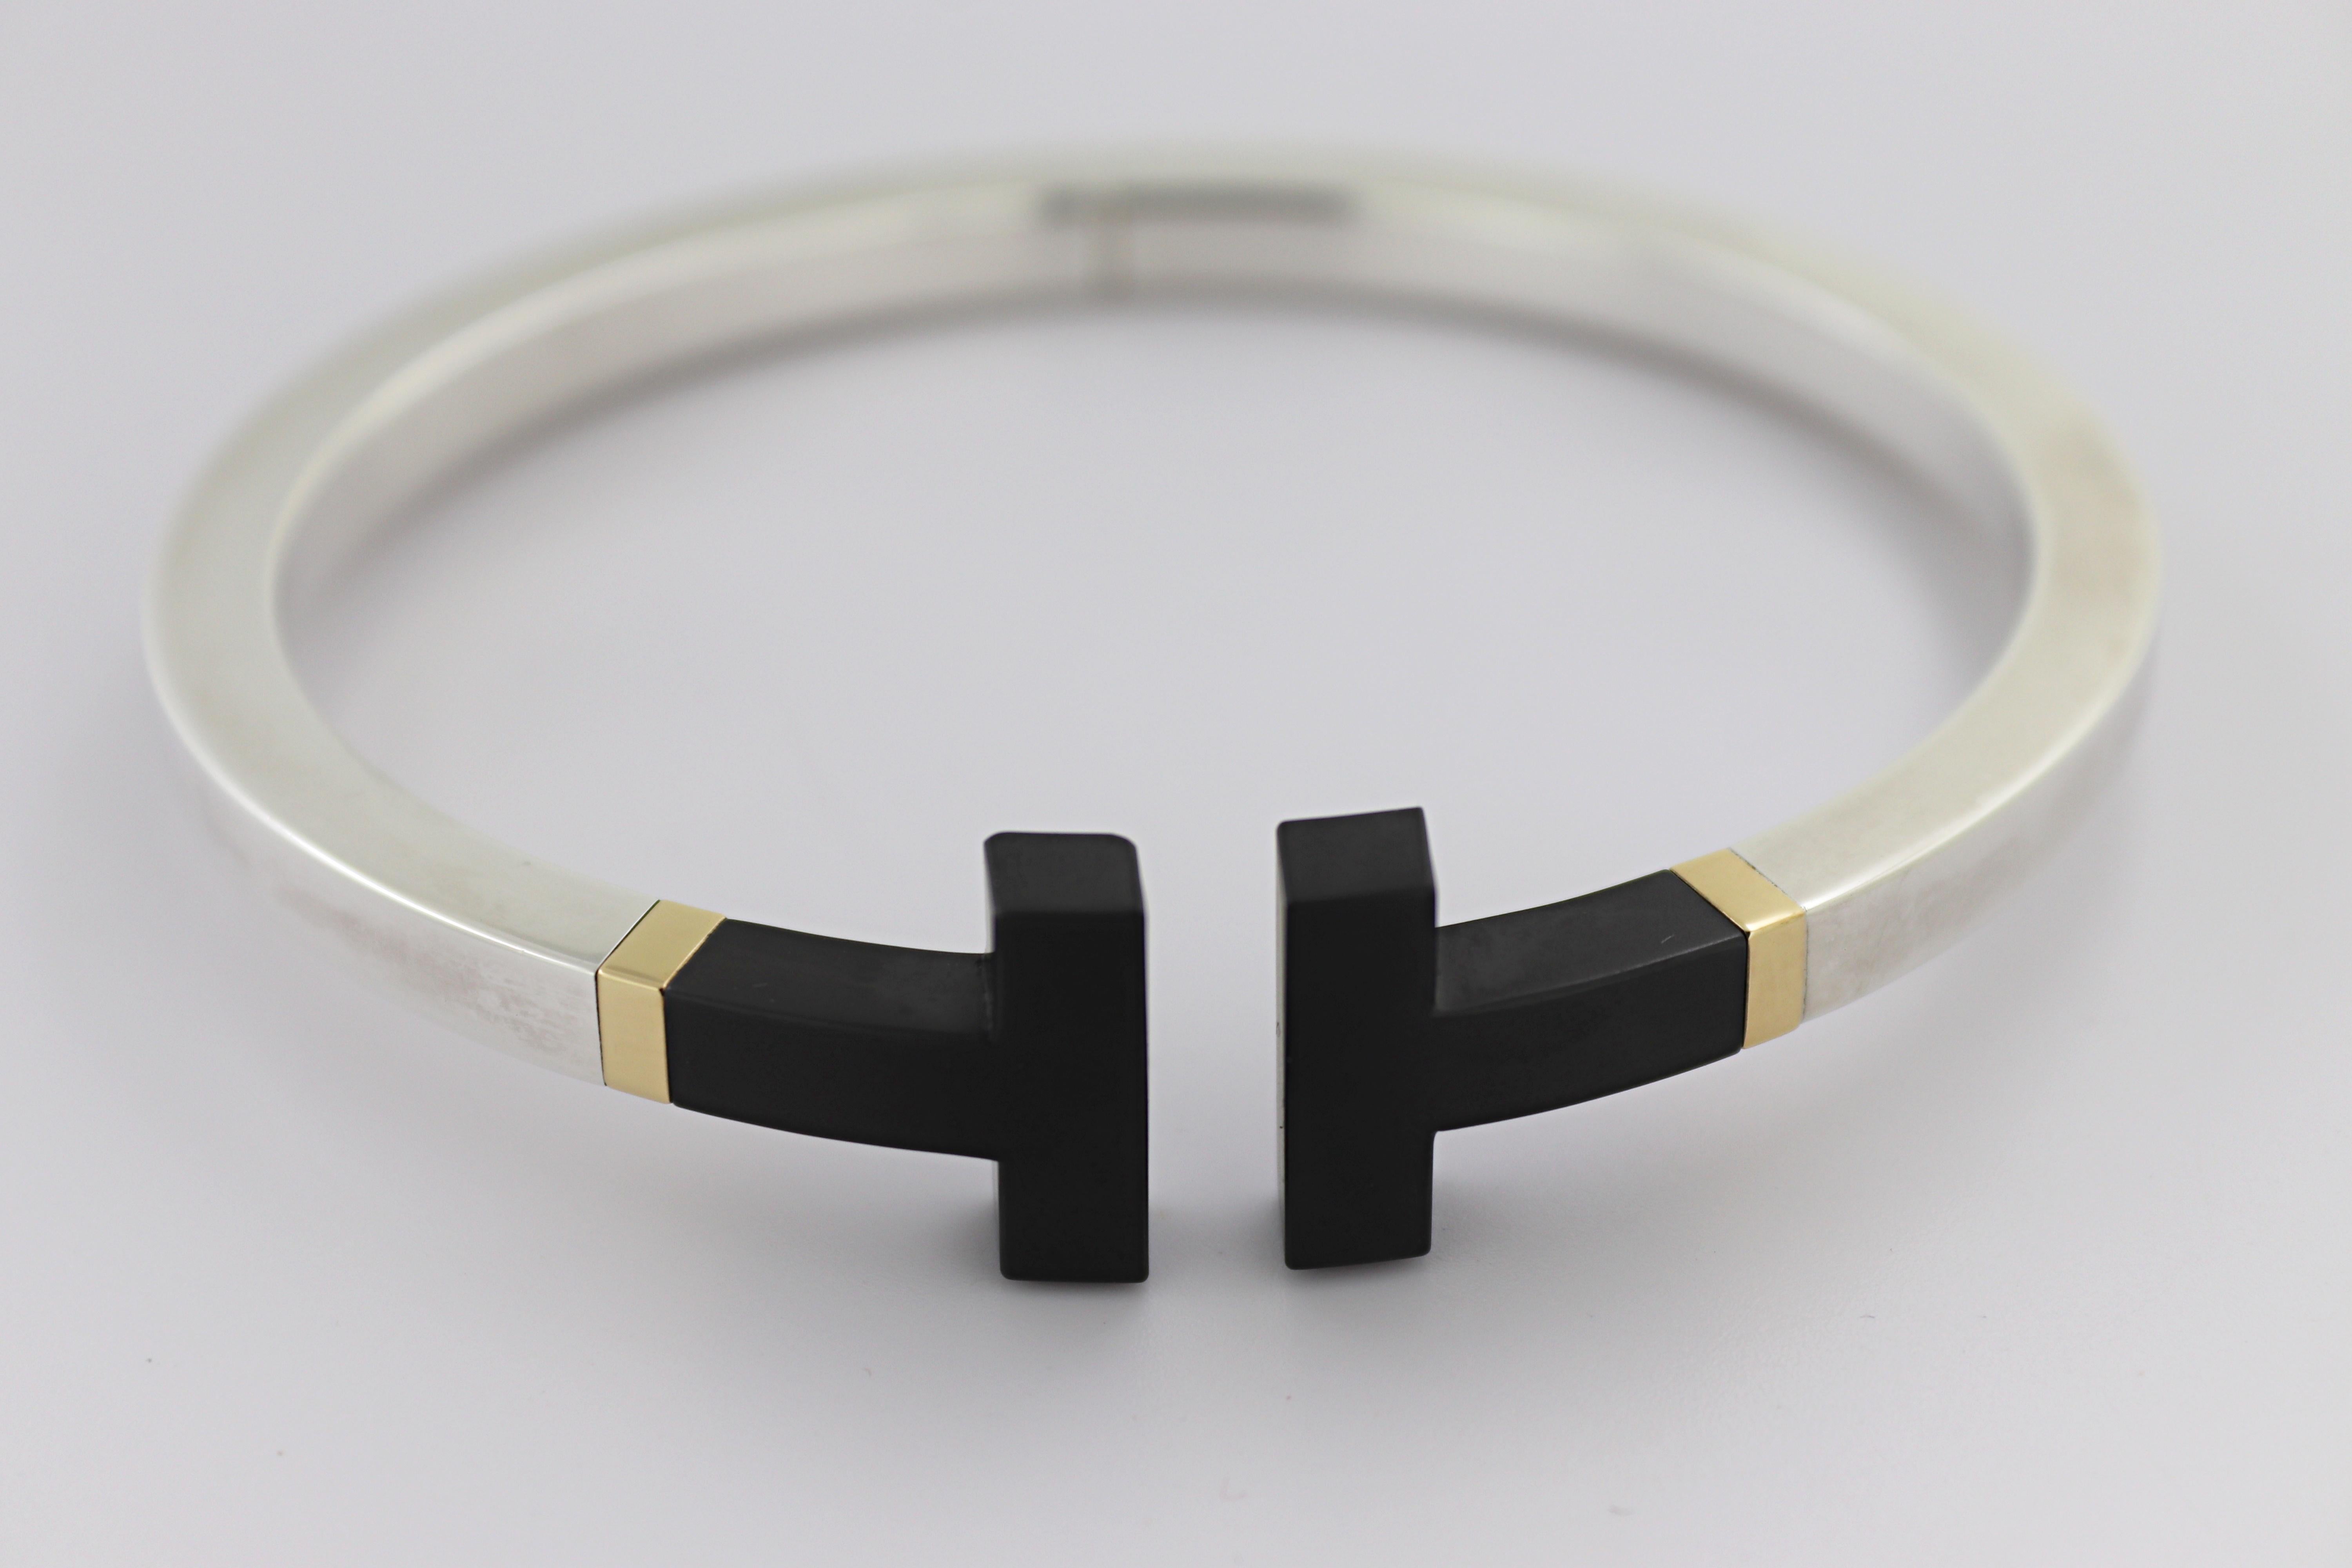 Tiffany & Co. Ceramic, Sterling Silver, 18k Yellow Gold “T” Bracelet In Good Condition For Sale In Pleasant Hill, CA